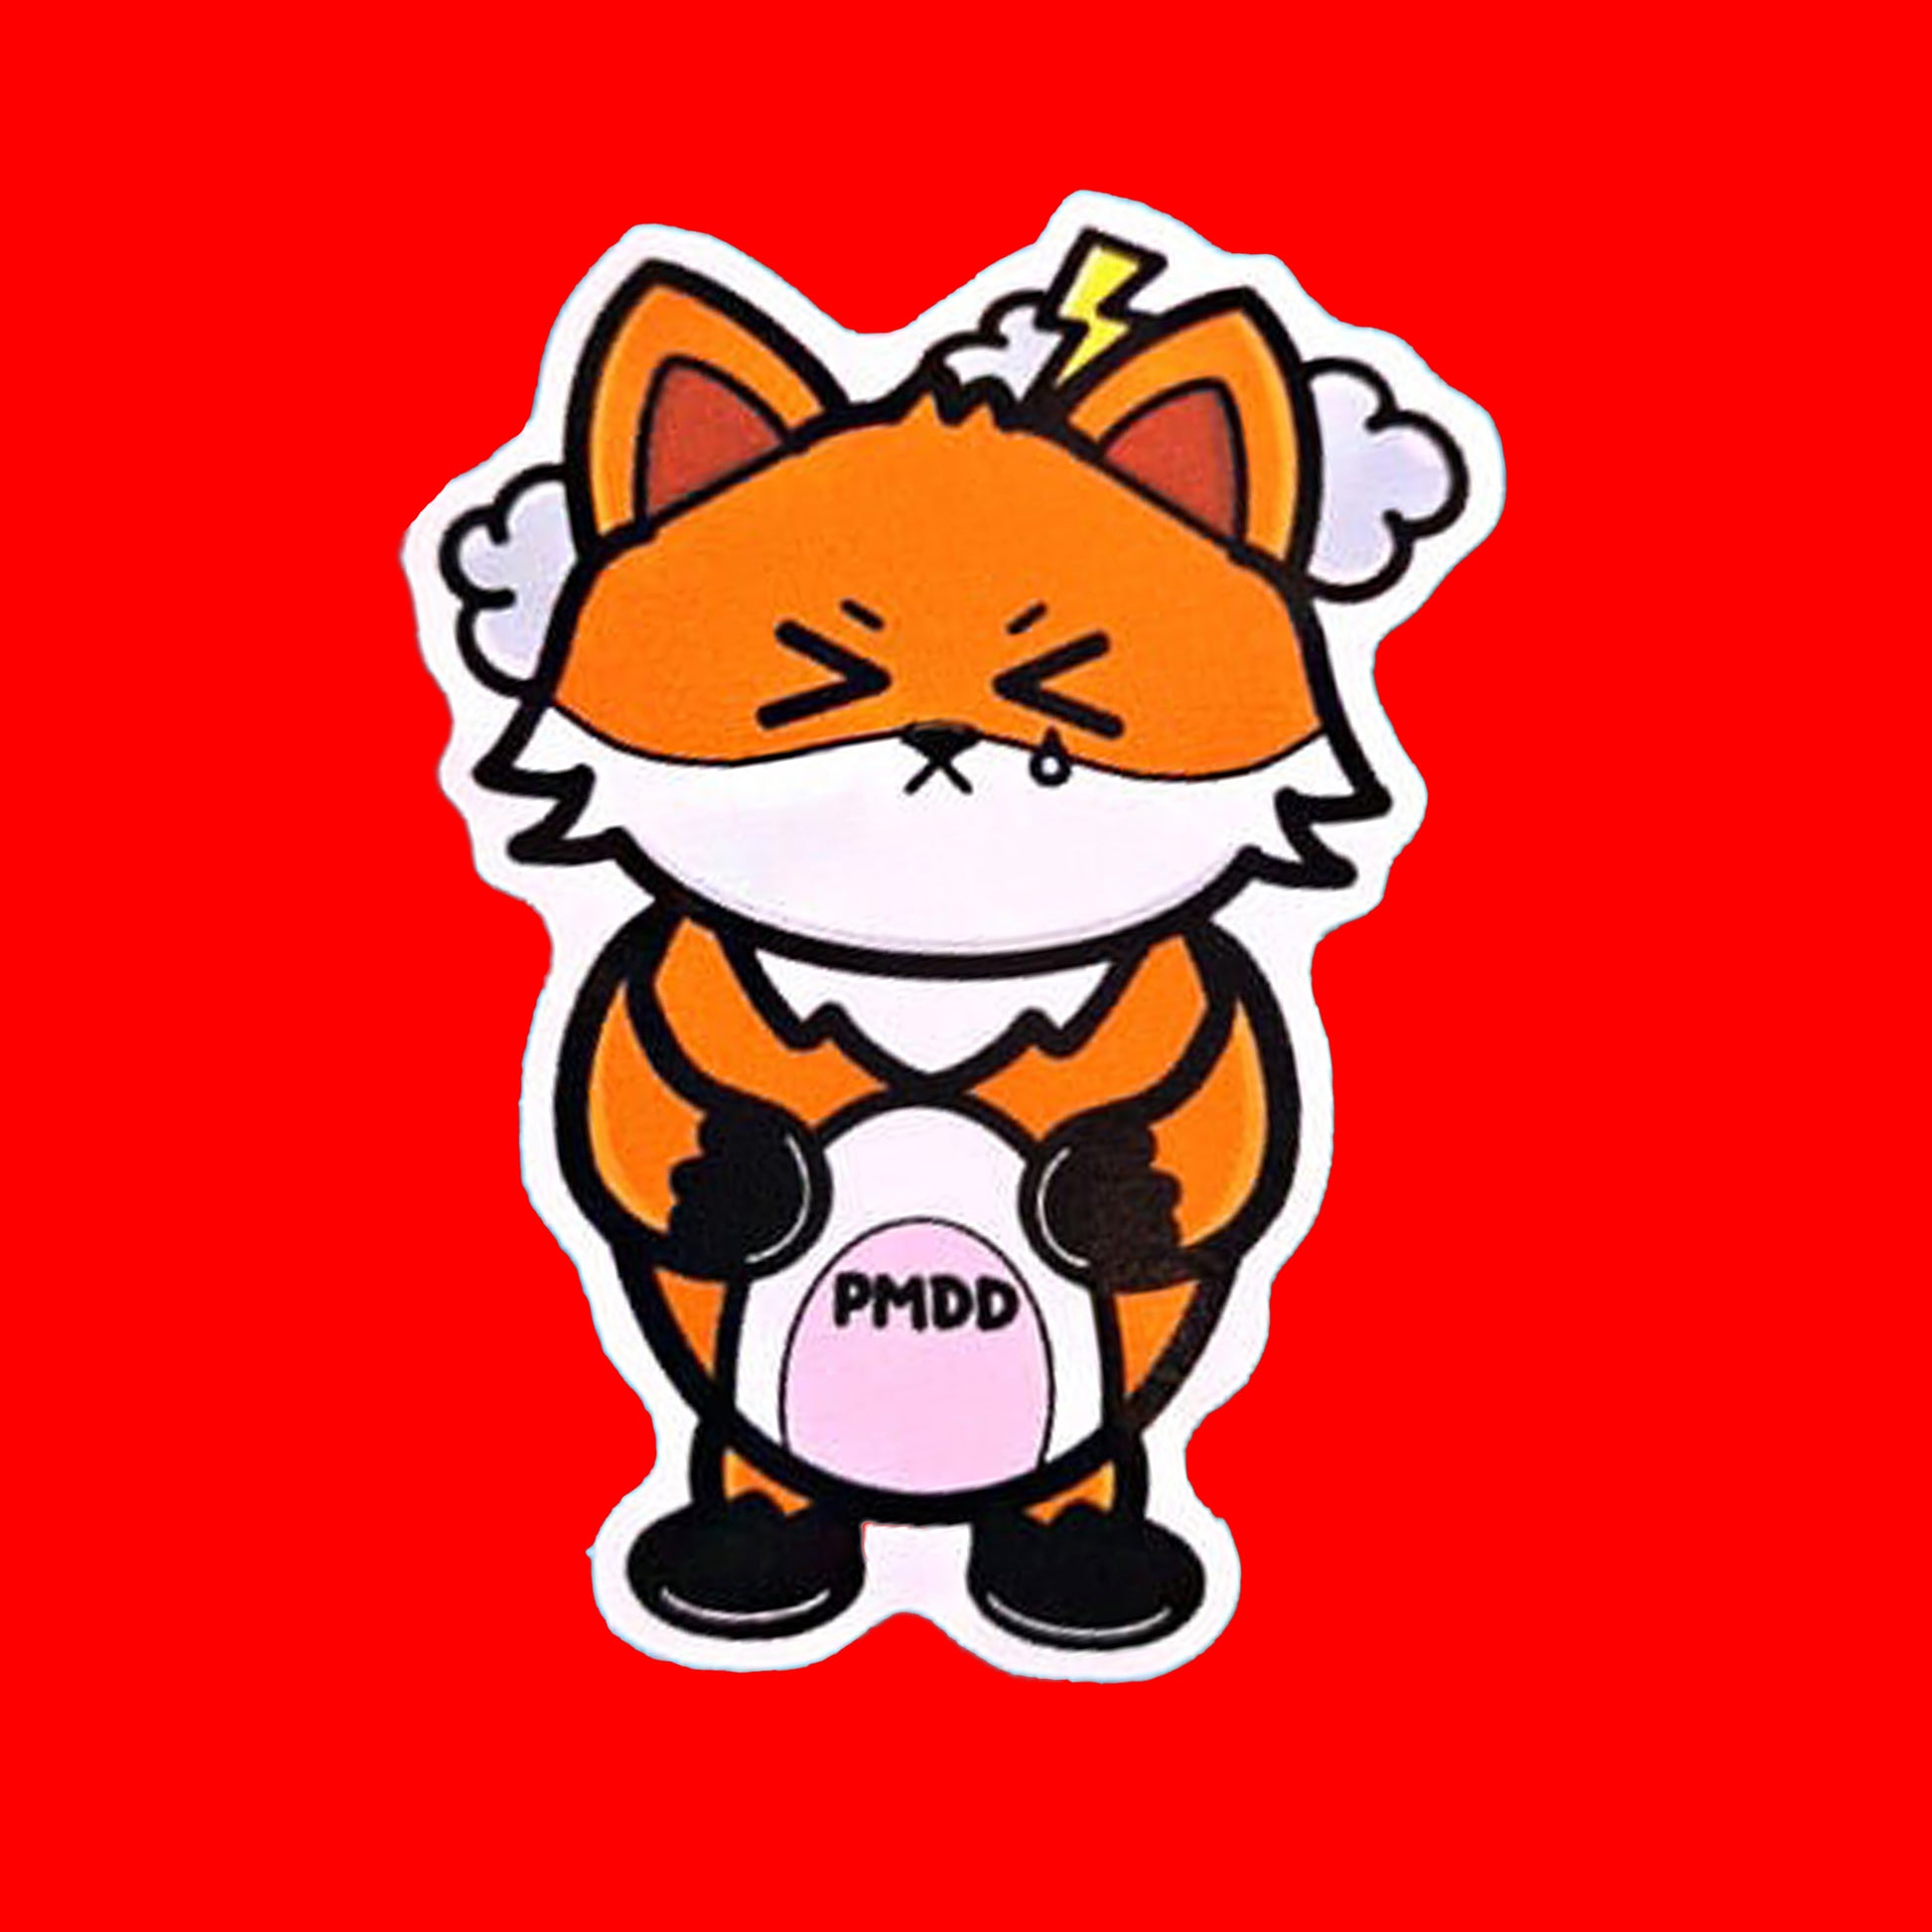 The PMDD Fox Sticker - Premenstrual Dysphoric Disorder PMDD on a red background. The orange fox sticker has its eyes scrunched shut with storm clouds above its head, clutching its pink belly with black text reading 'PMDD'. The hand drawn design is raising awareness for Premenstrual Dysphoric Disorder.